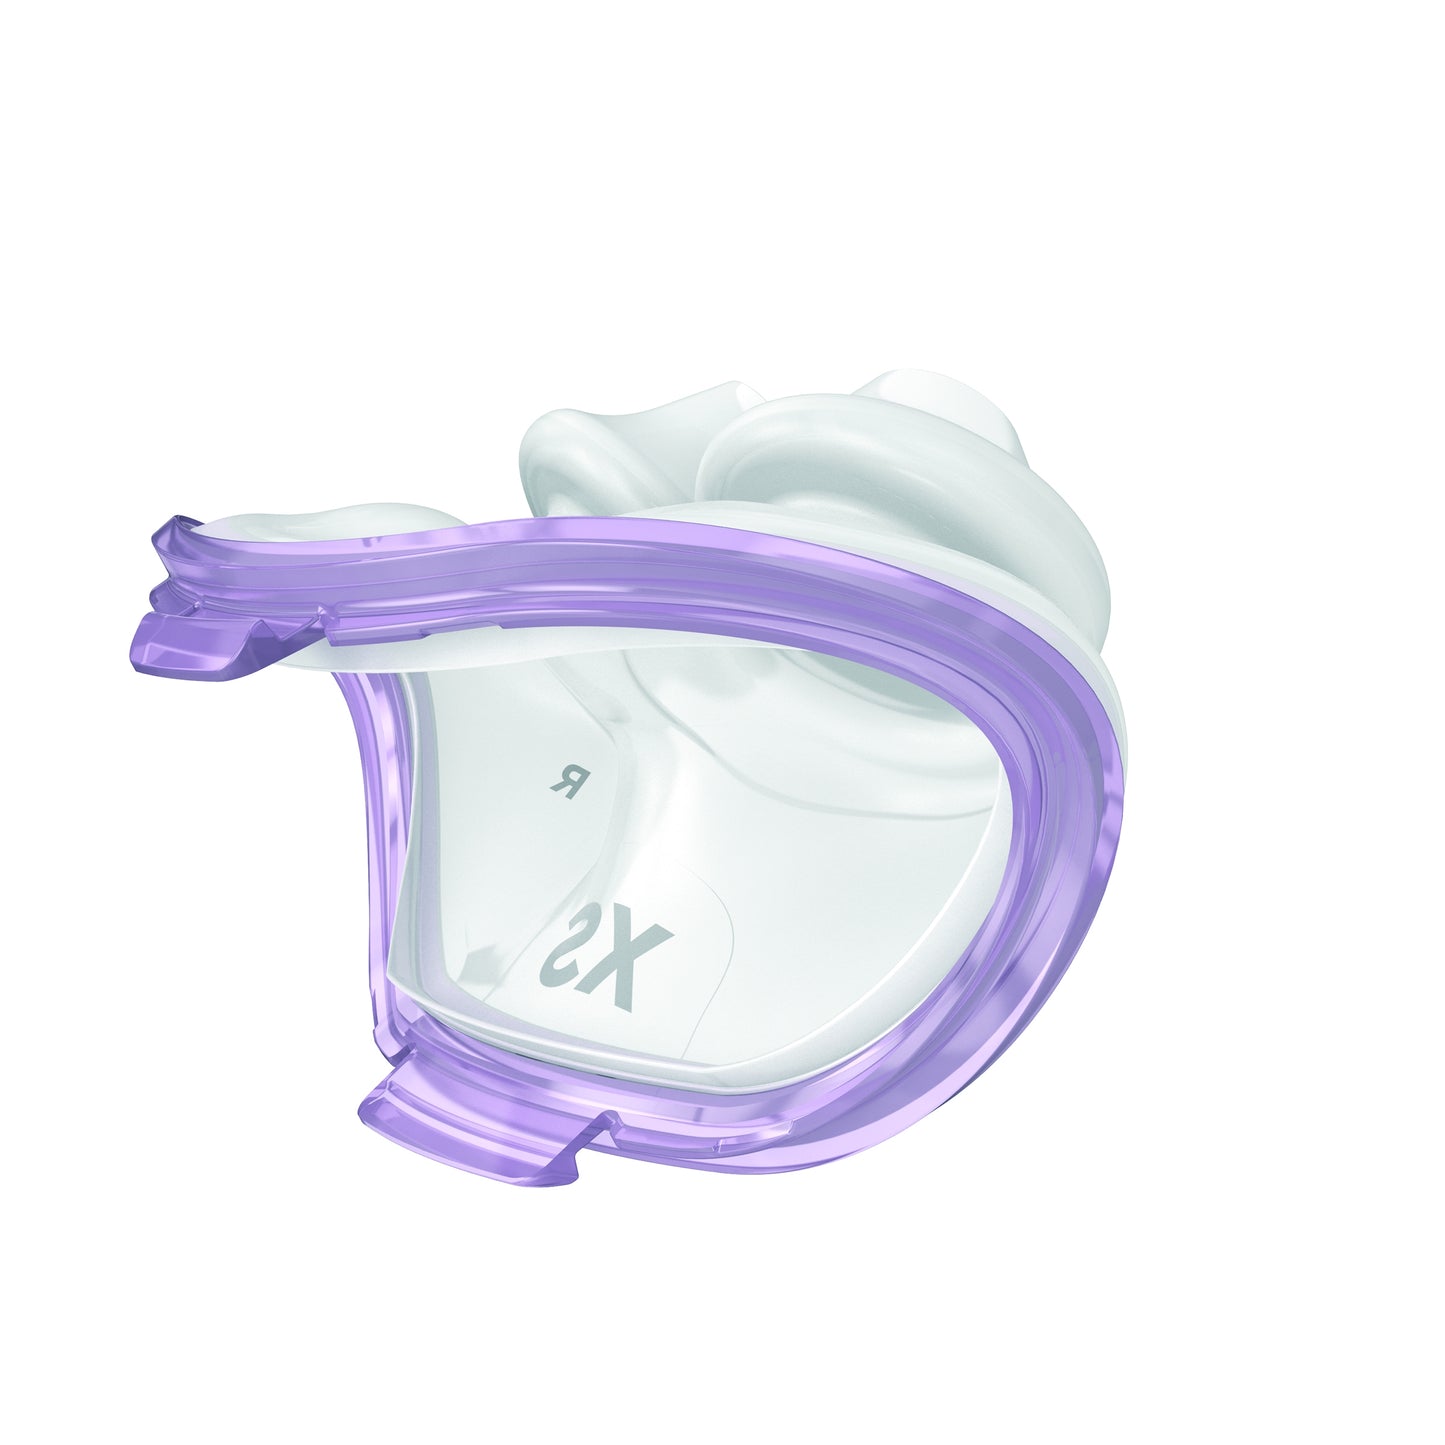 AirFit P10 nasal pillows mask for HER